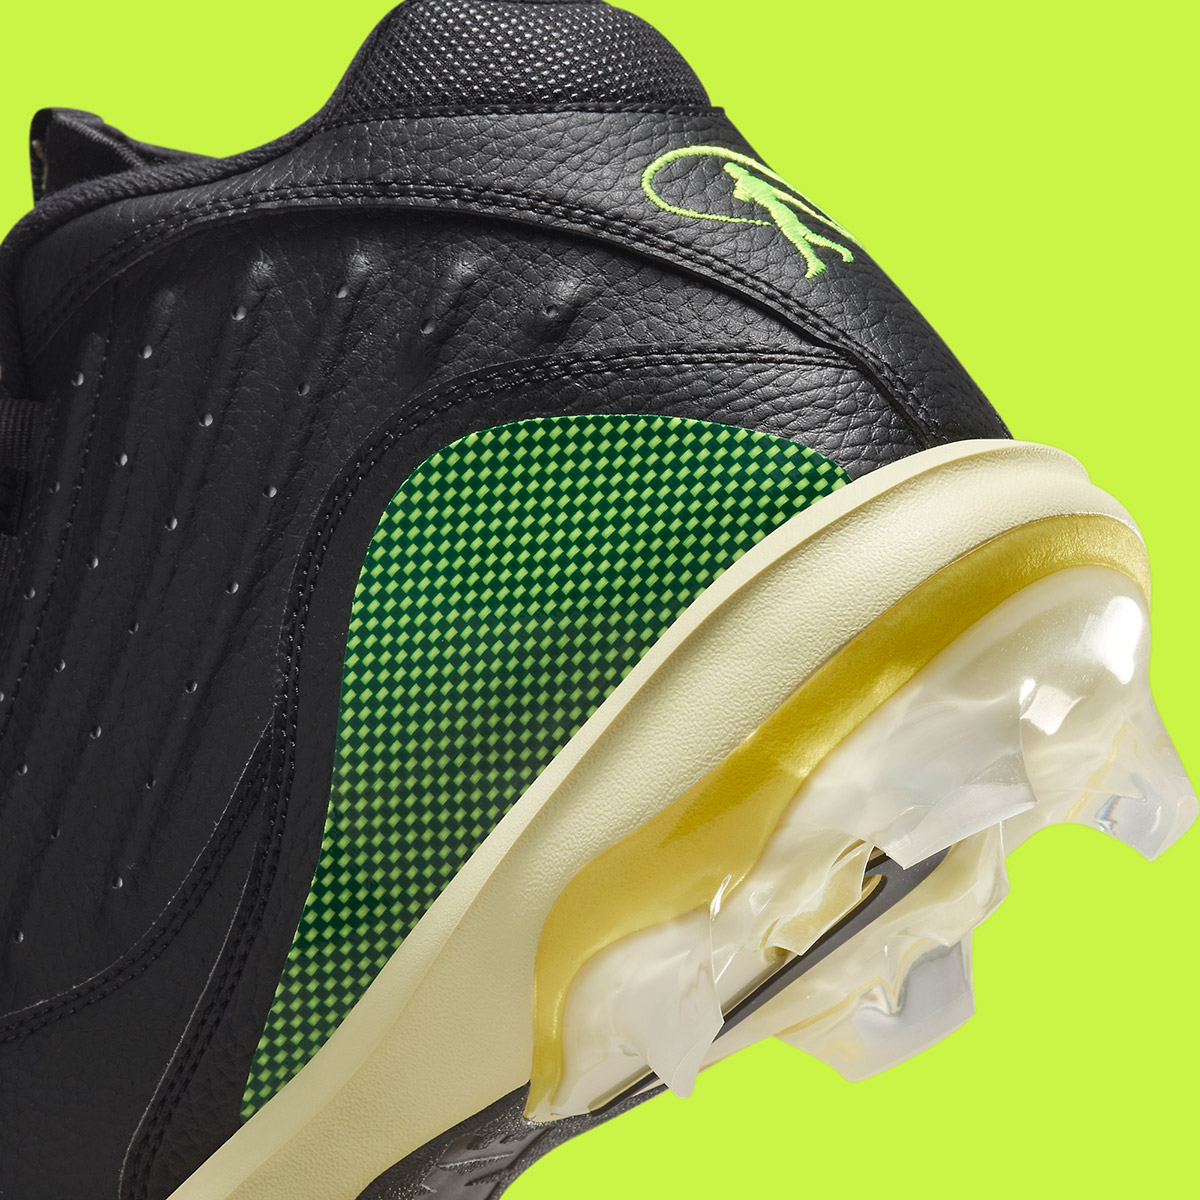 Nike Griffey Max 2 Cleats Black Volt Release Date 9